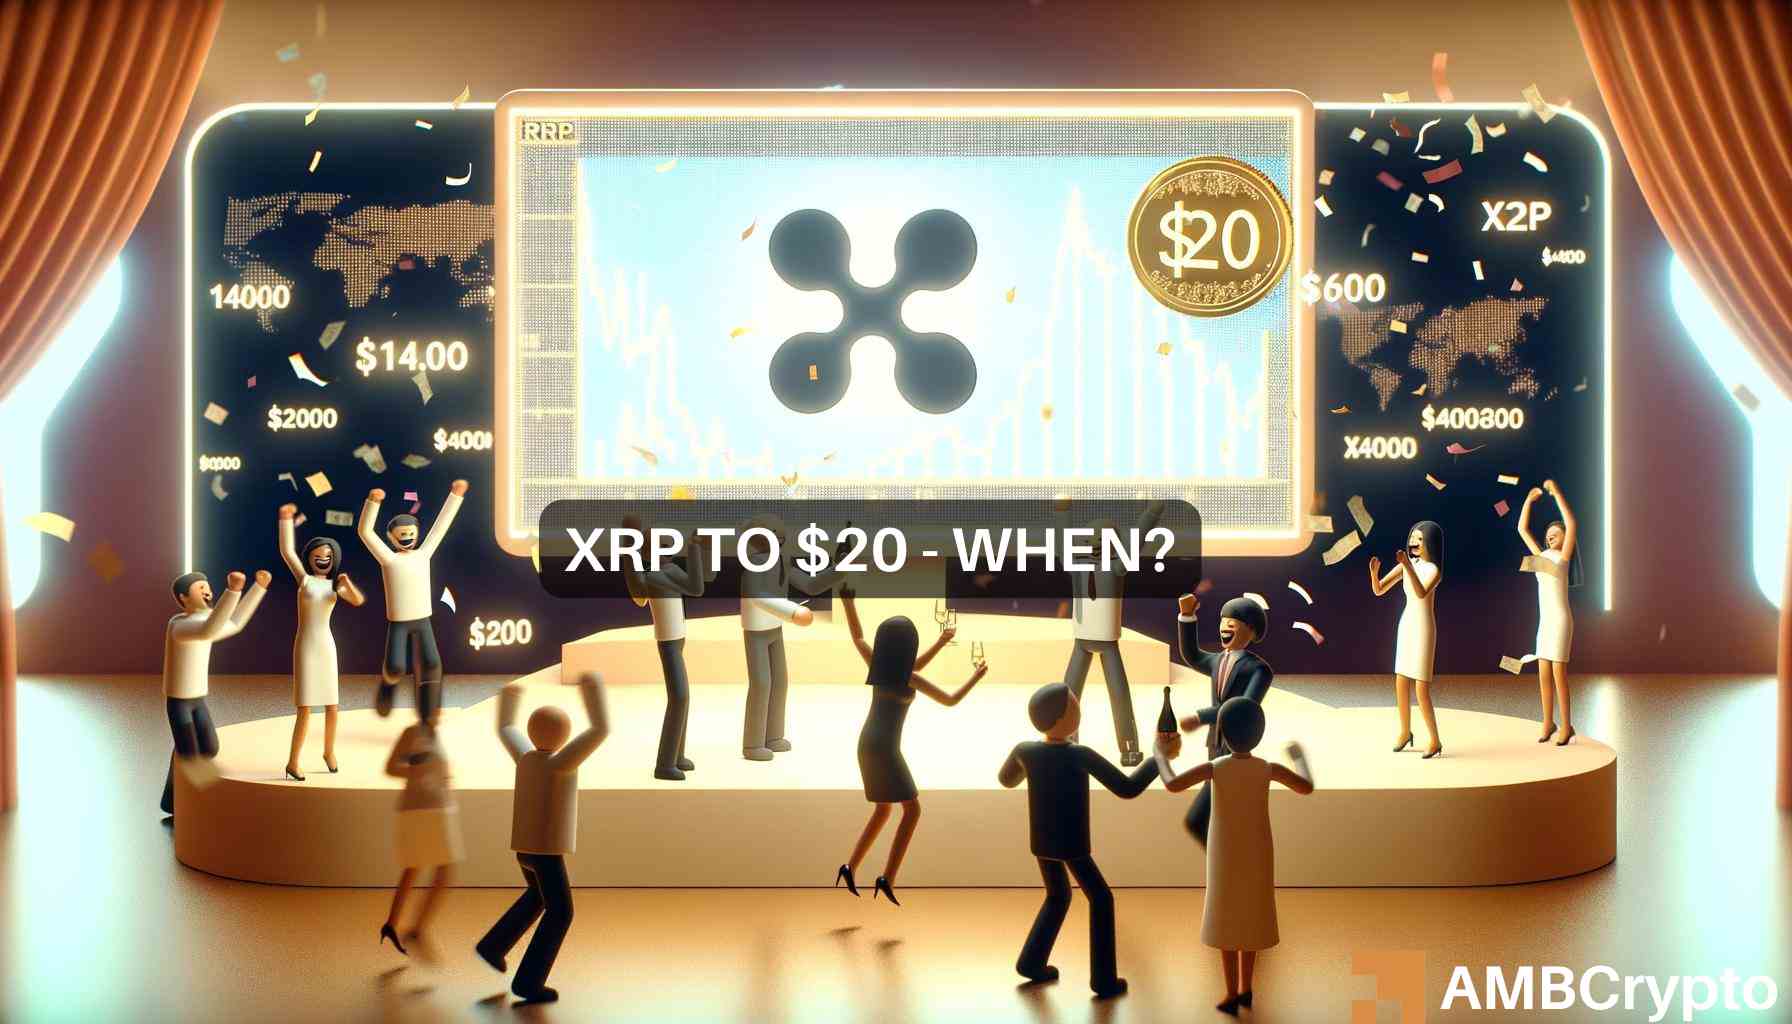 Can XRP surge 650x again? Examining whether the altcoin can rise to $20